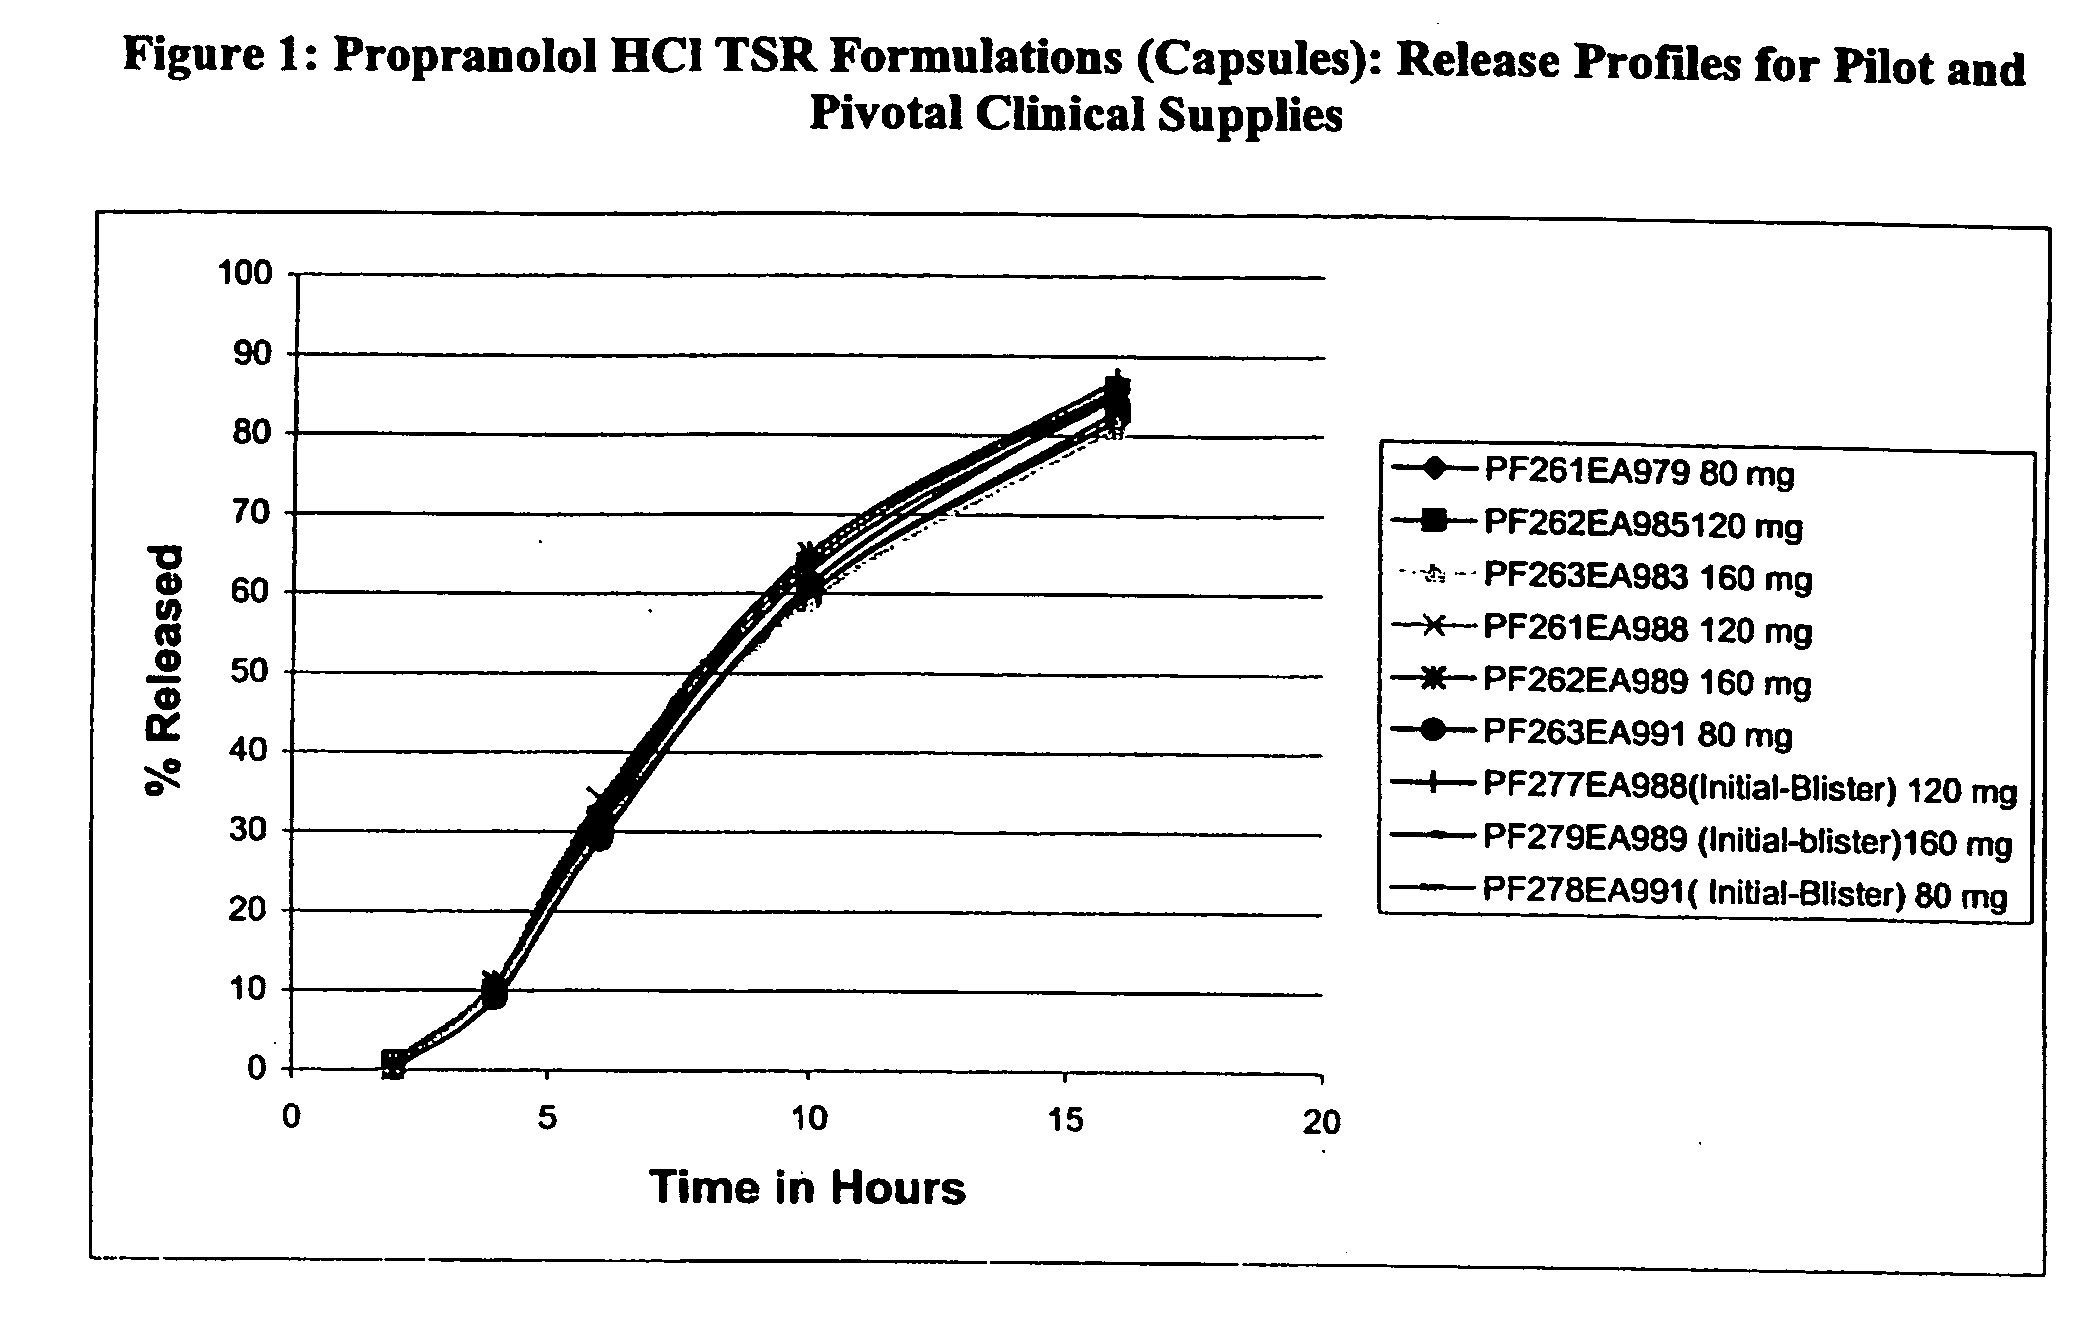 Timed, sustained release systems for propranolol